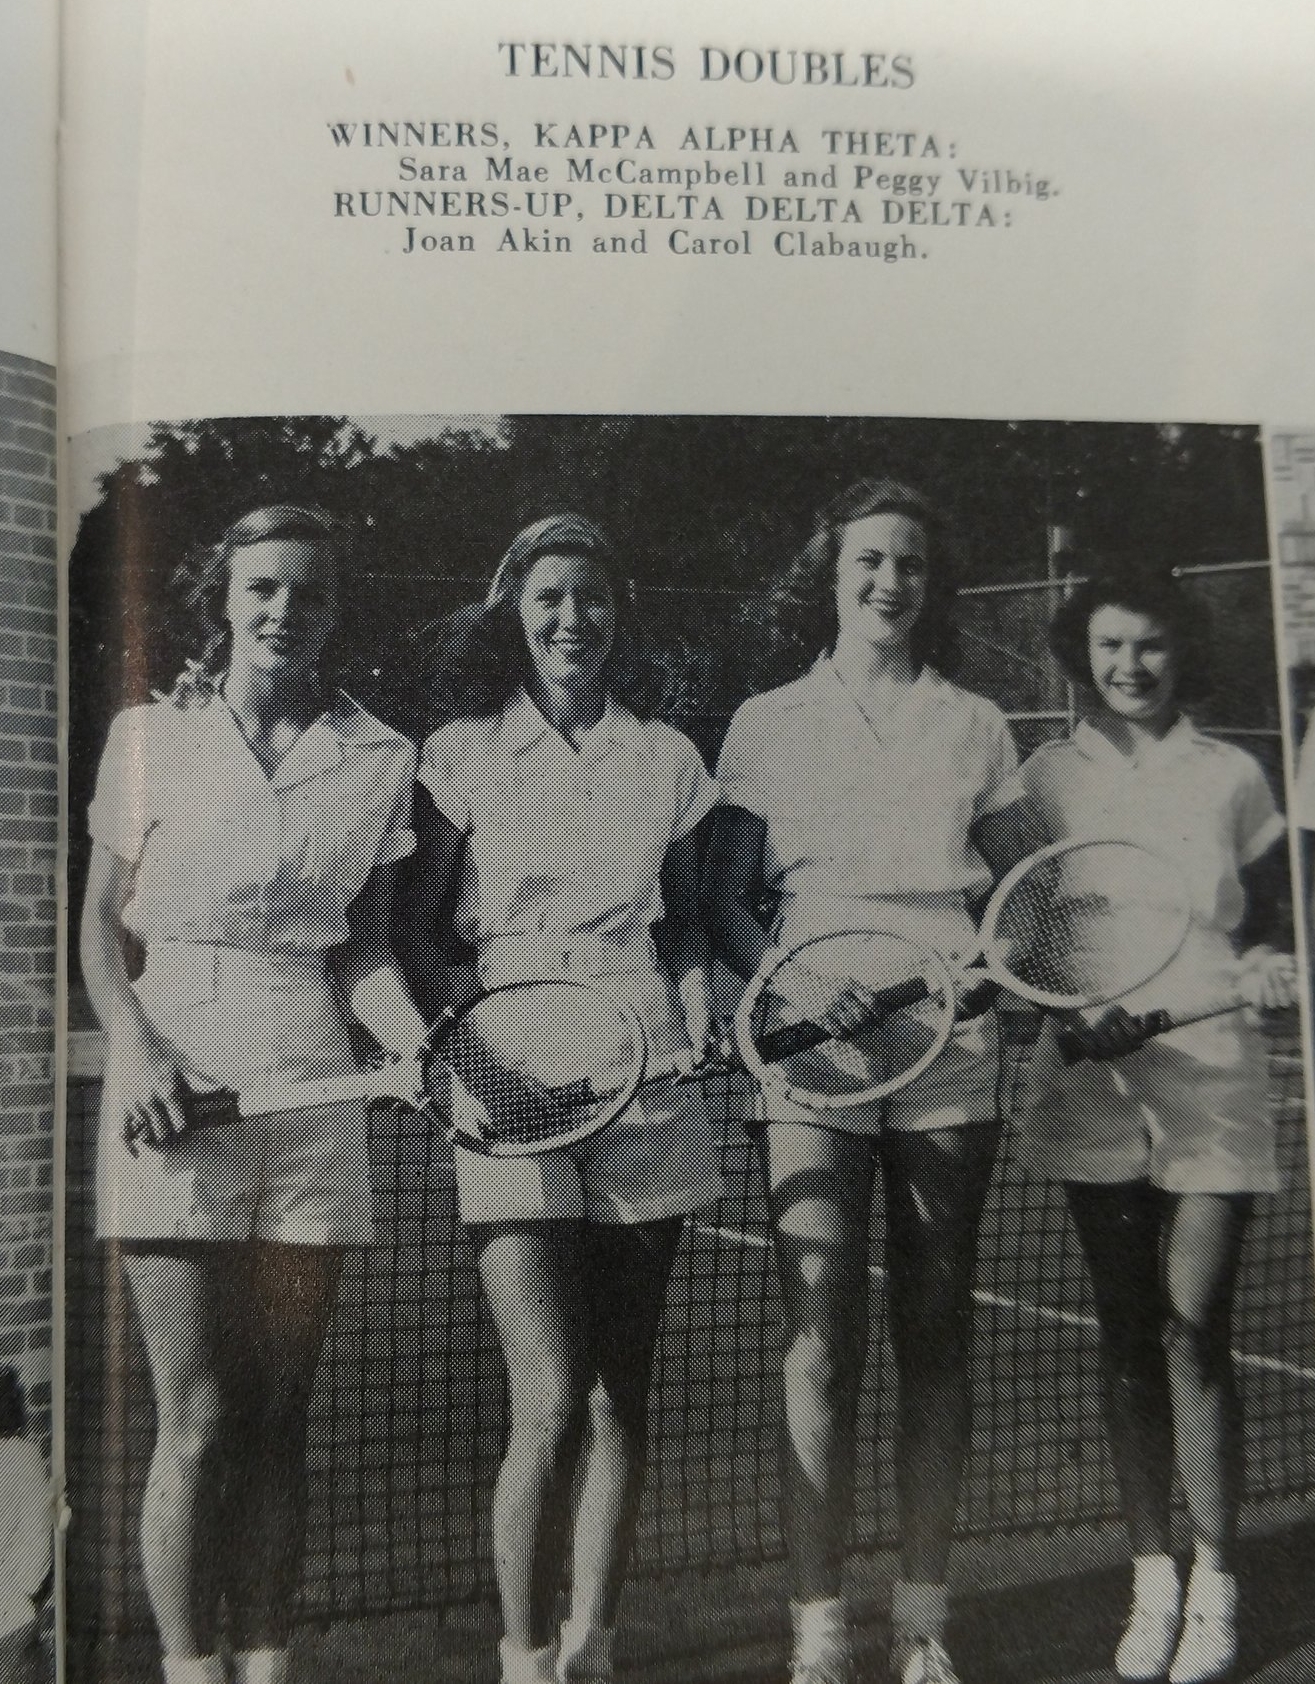 Winners doubles tennis Sara Mae McCampbell and Peggy Vilbig - Runners up Joan Akin and Carol Clabaugh 